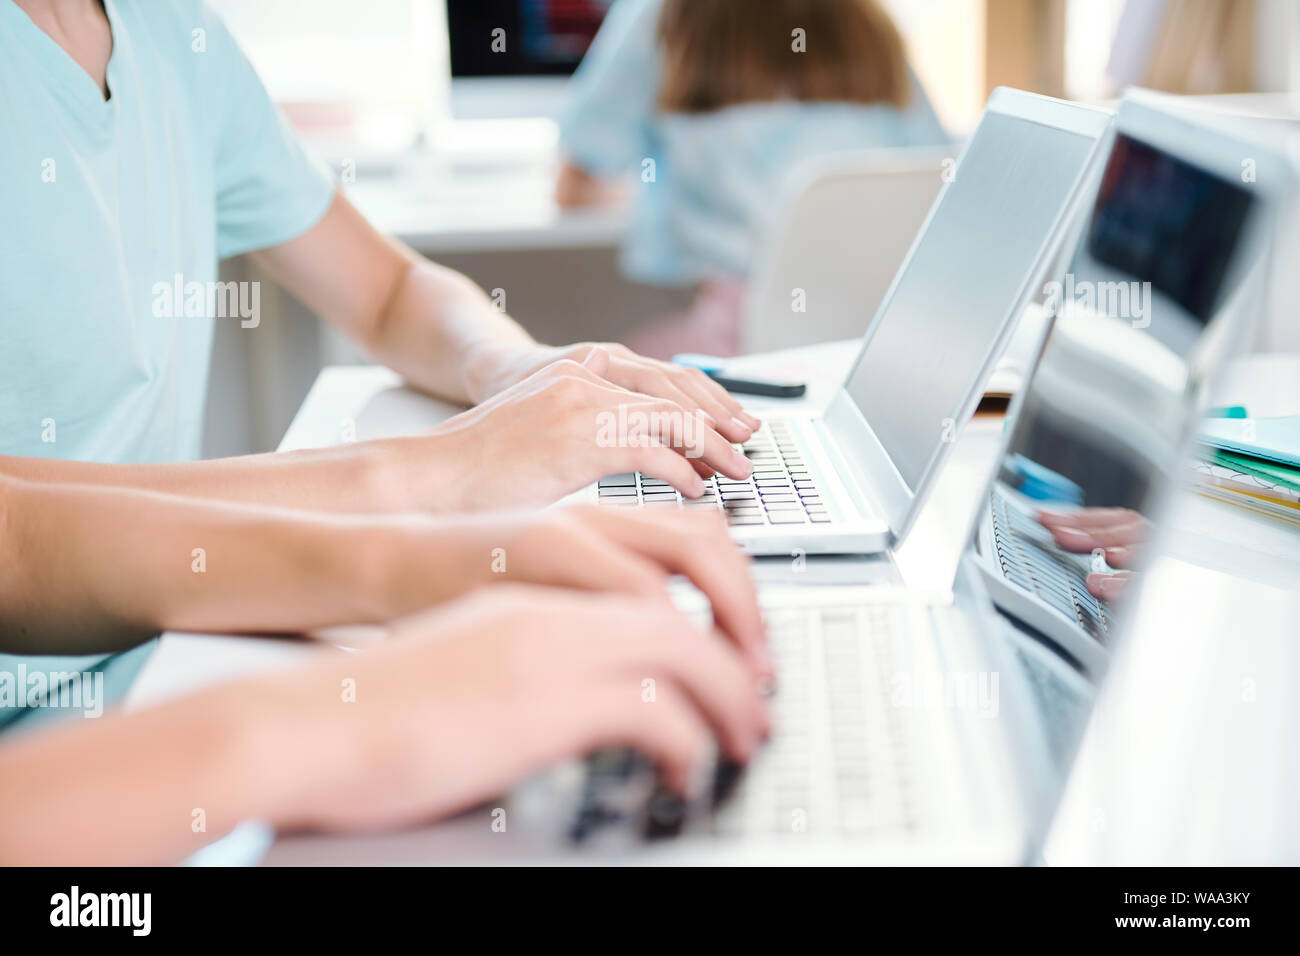 Two contemporary students of school or college typing on laptop keypads Stock Photo